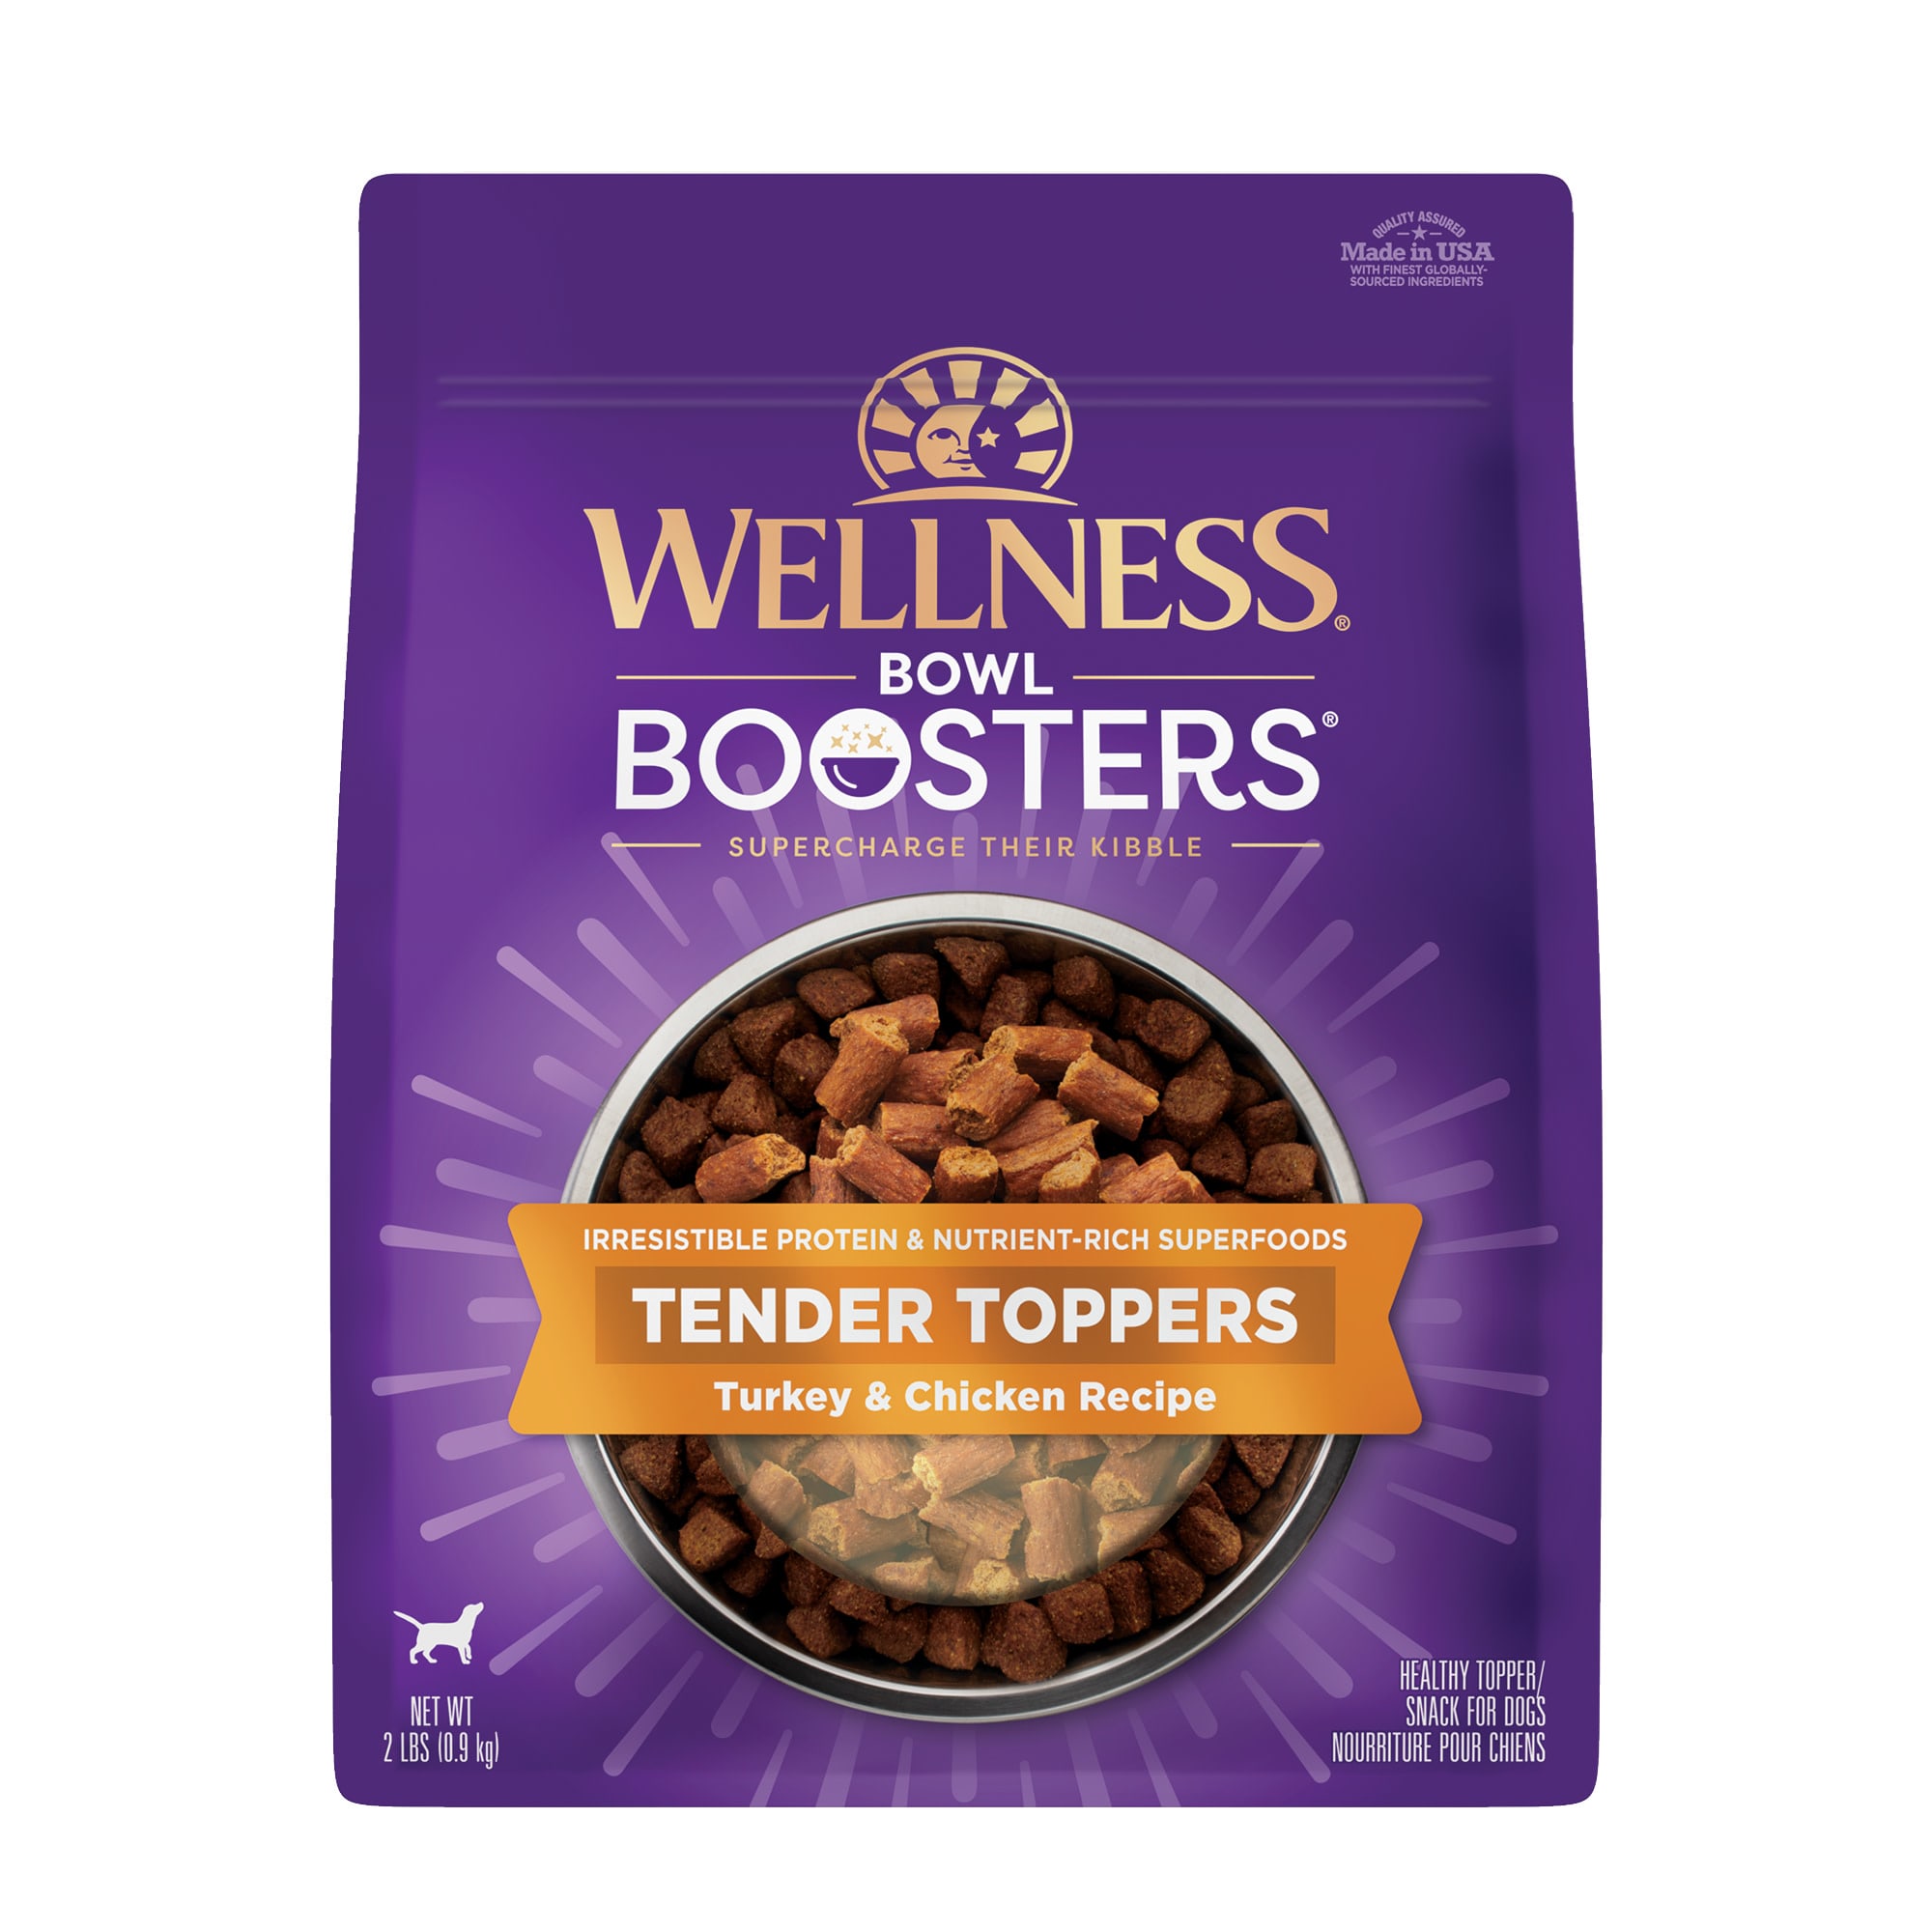 Wellness Bowl Boosters Tender Toppers Turkey & Chicken Recipe Dry Dog Food